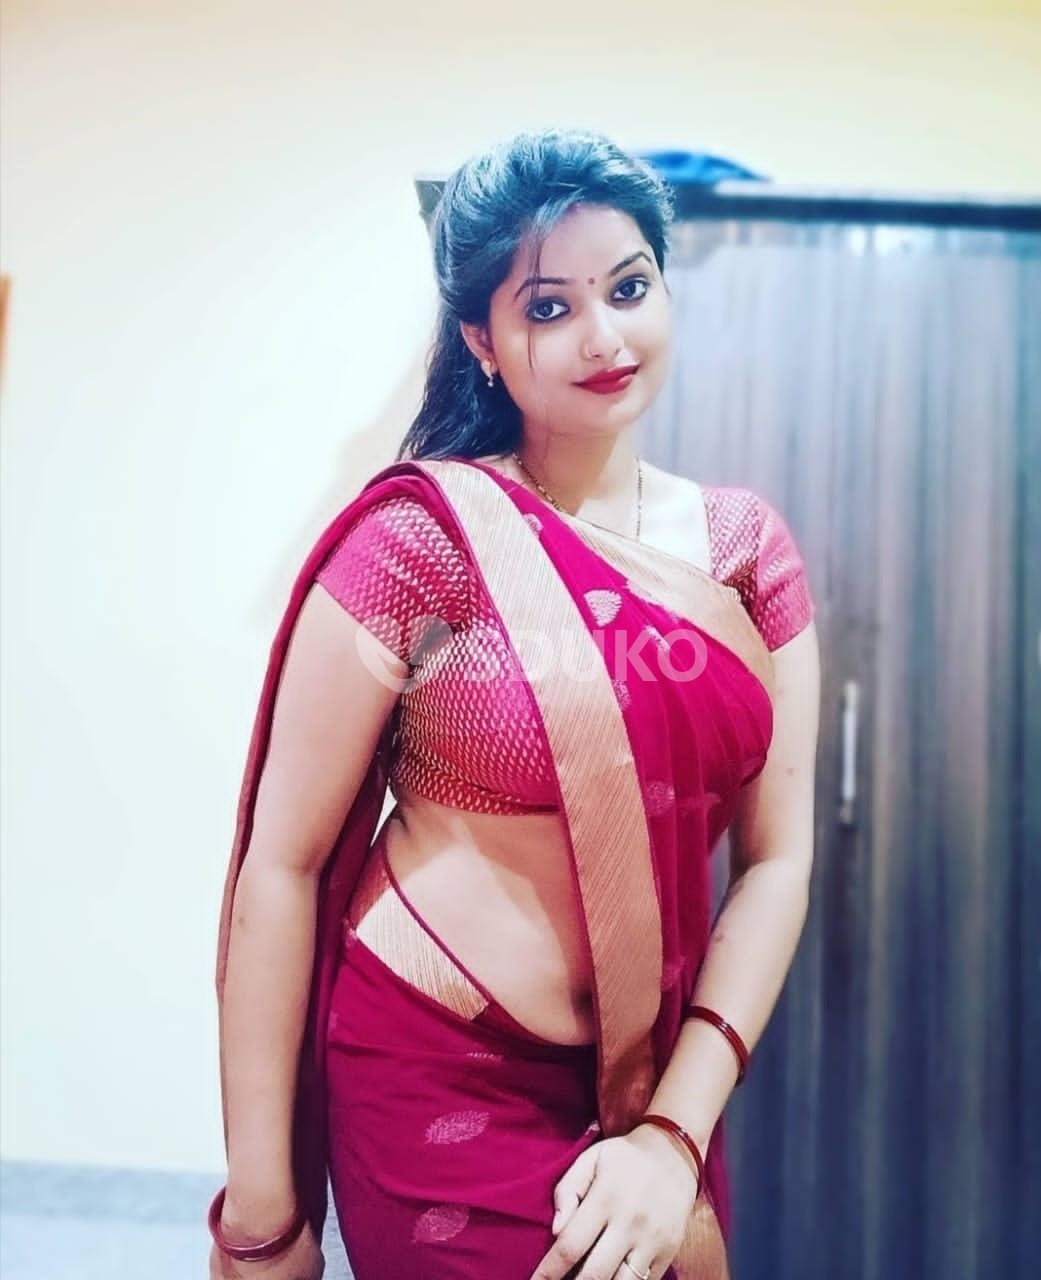 MURADABAD 💎 AMISHA INDIPENDENT CALL GIRL SERVICE IN & OUTCALL 🇮🇳TRUST